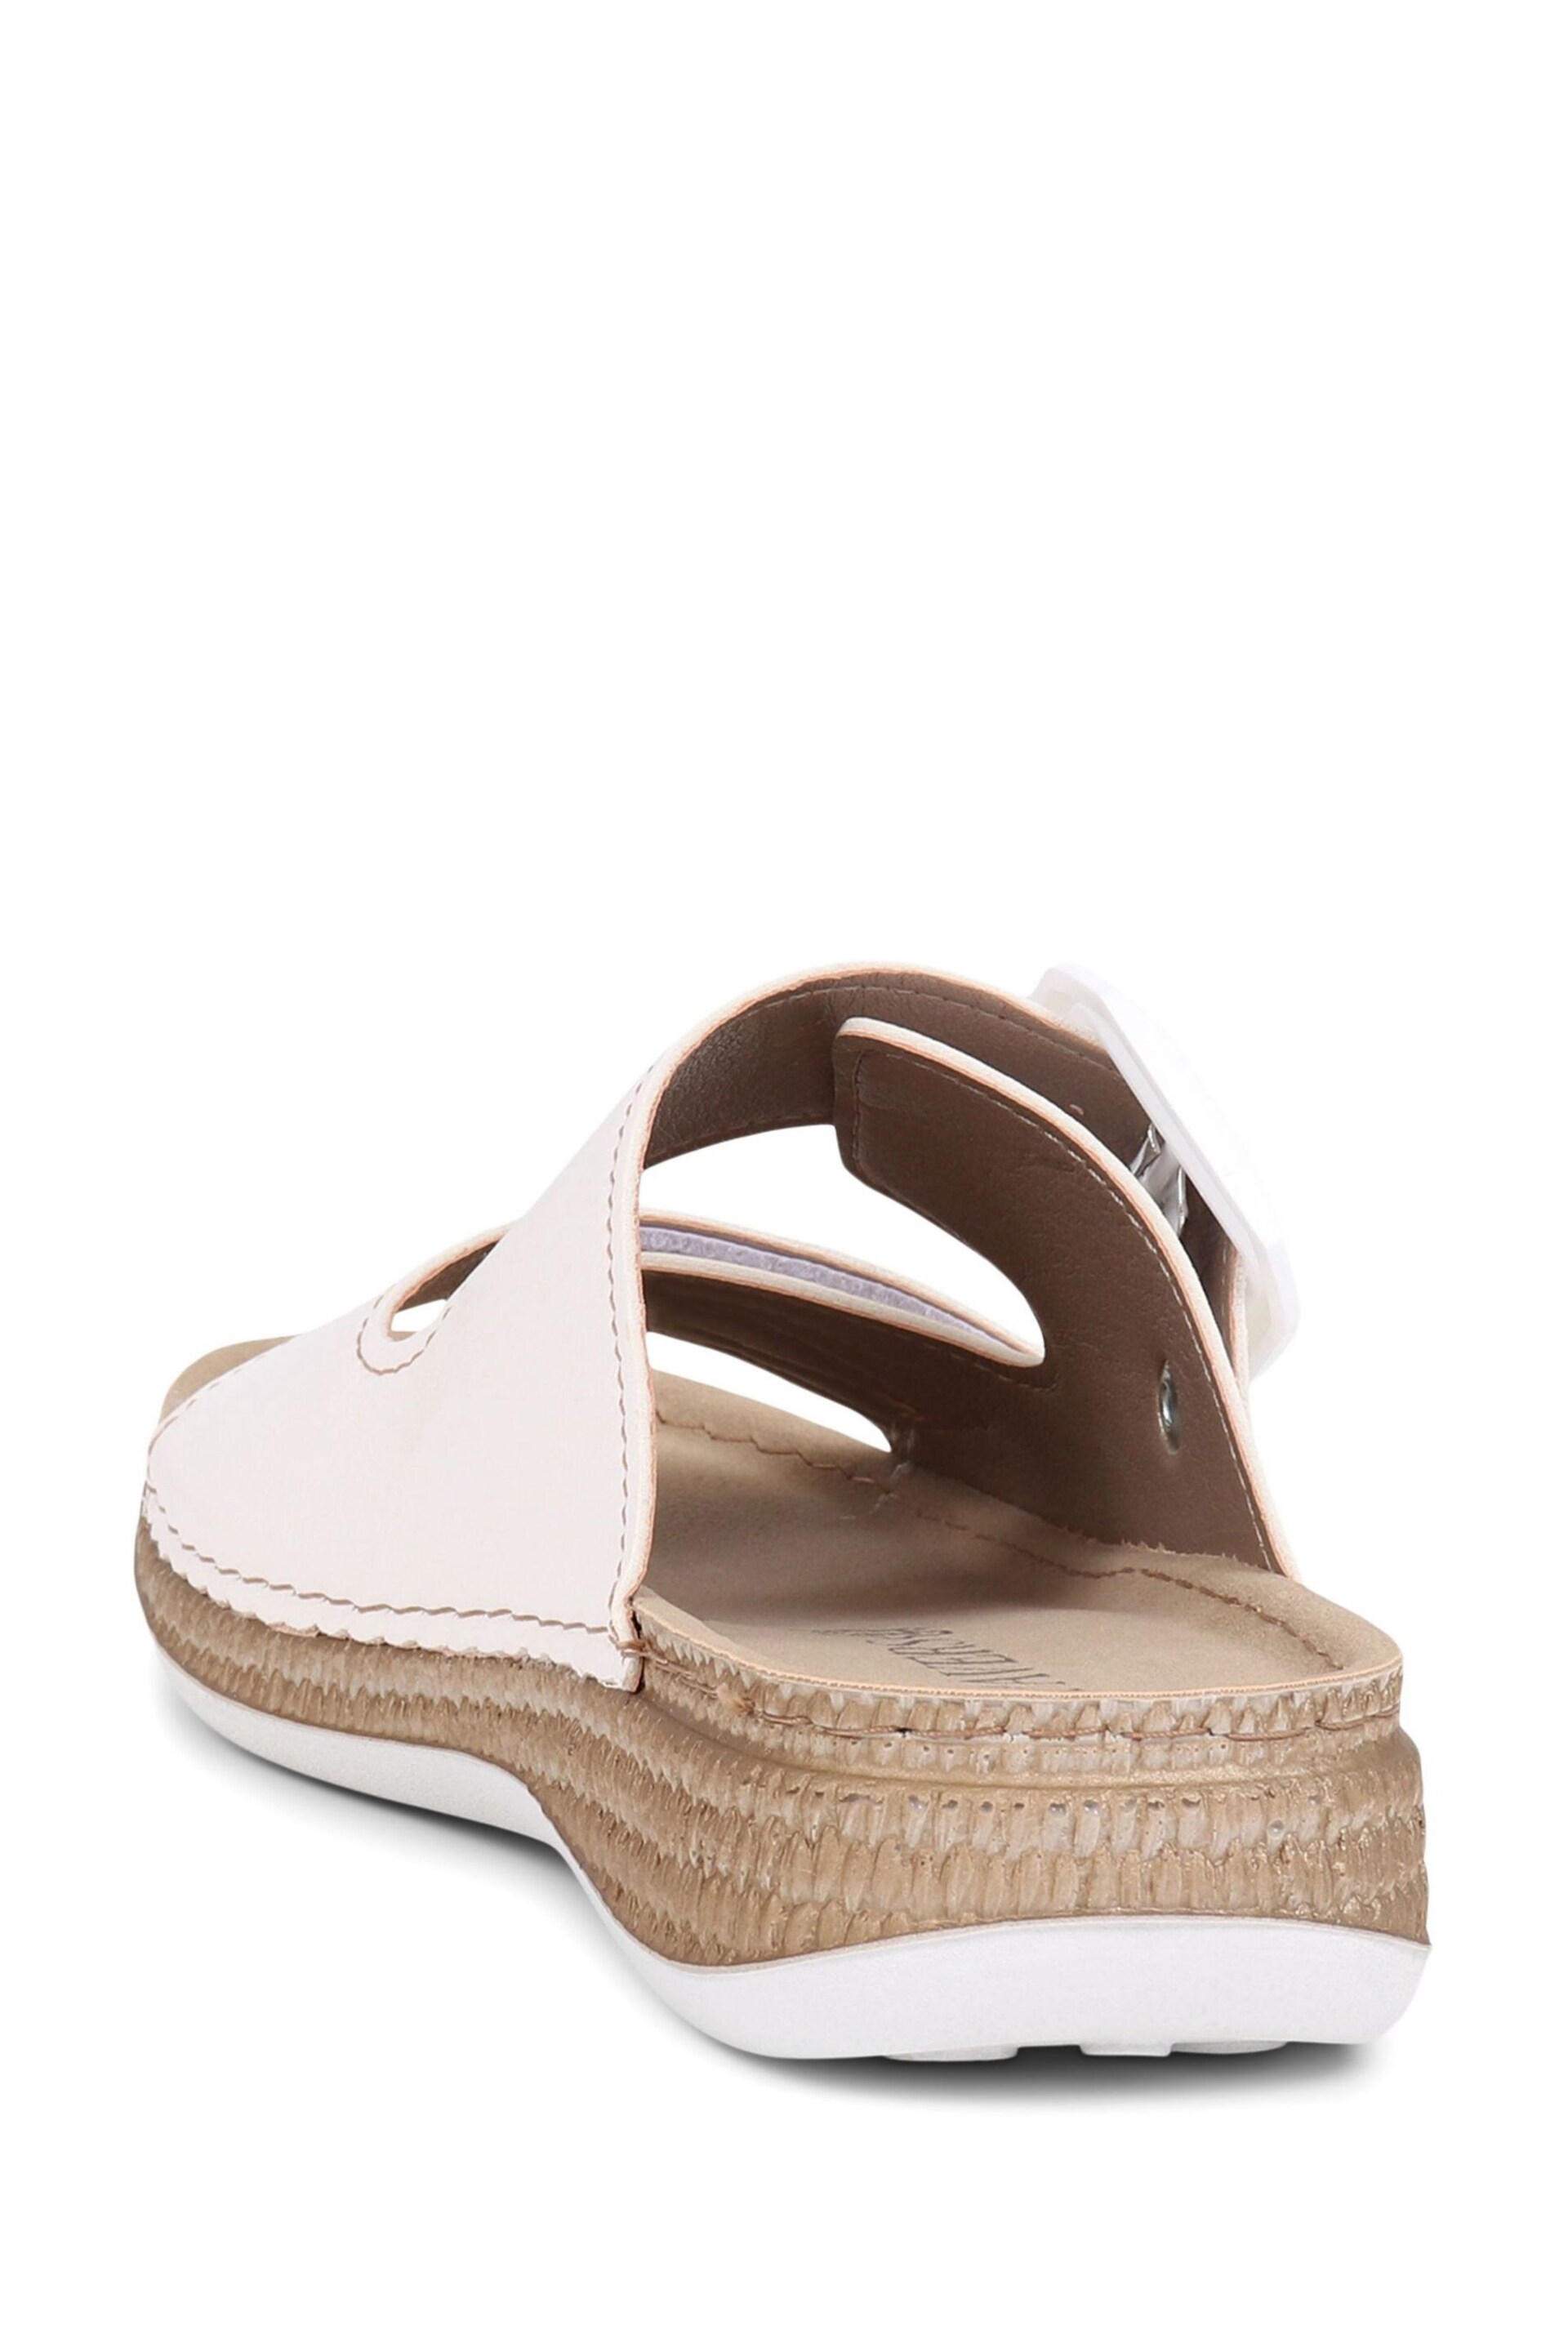 Pavers Ladies Casual Mules - Image 3 of 5